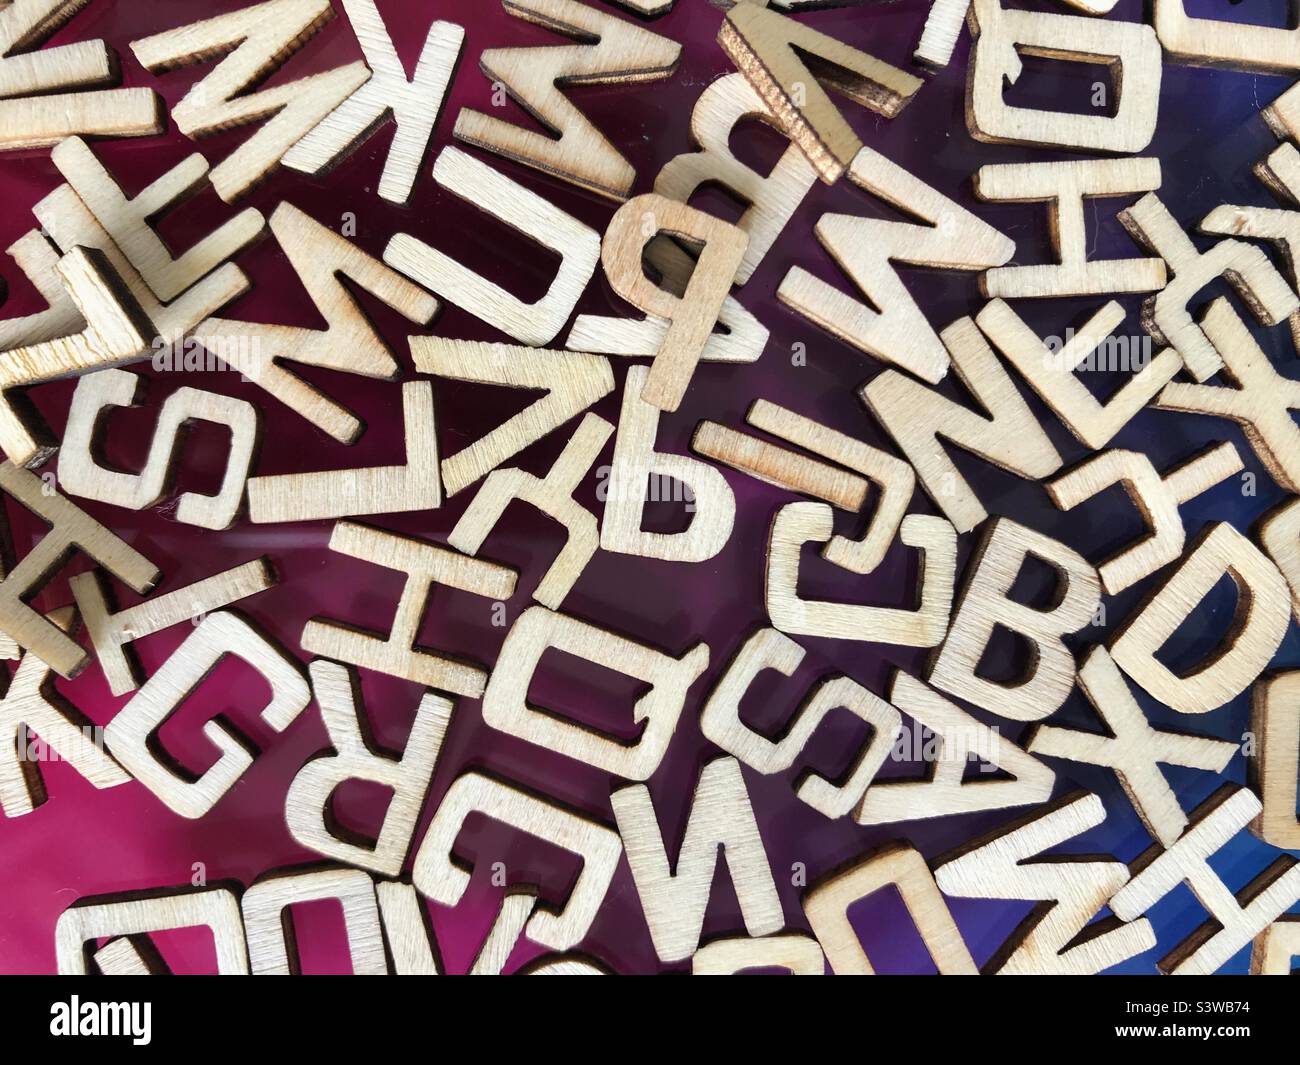 Wooden letters scrambled Stock Photo